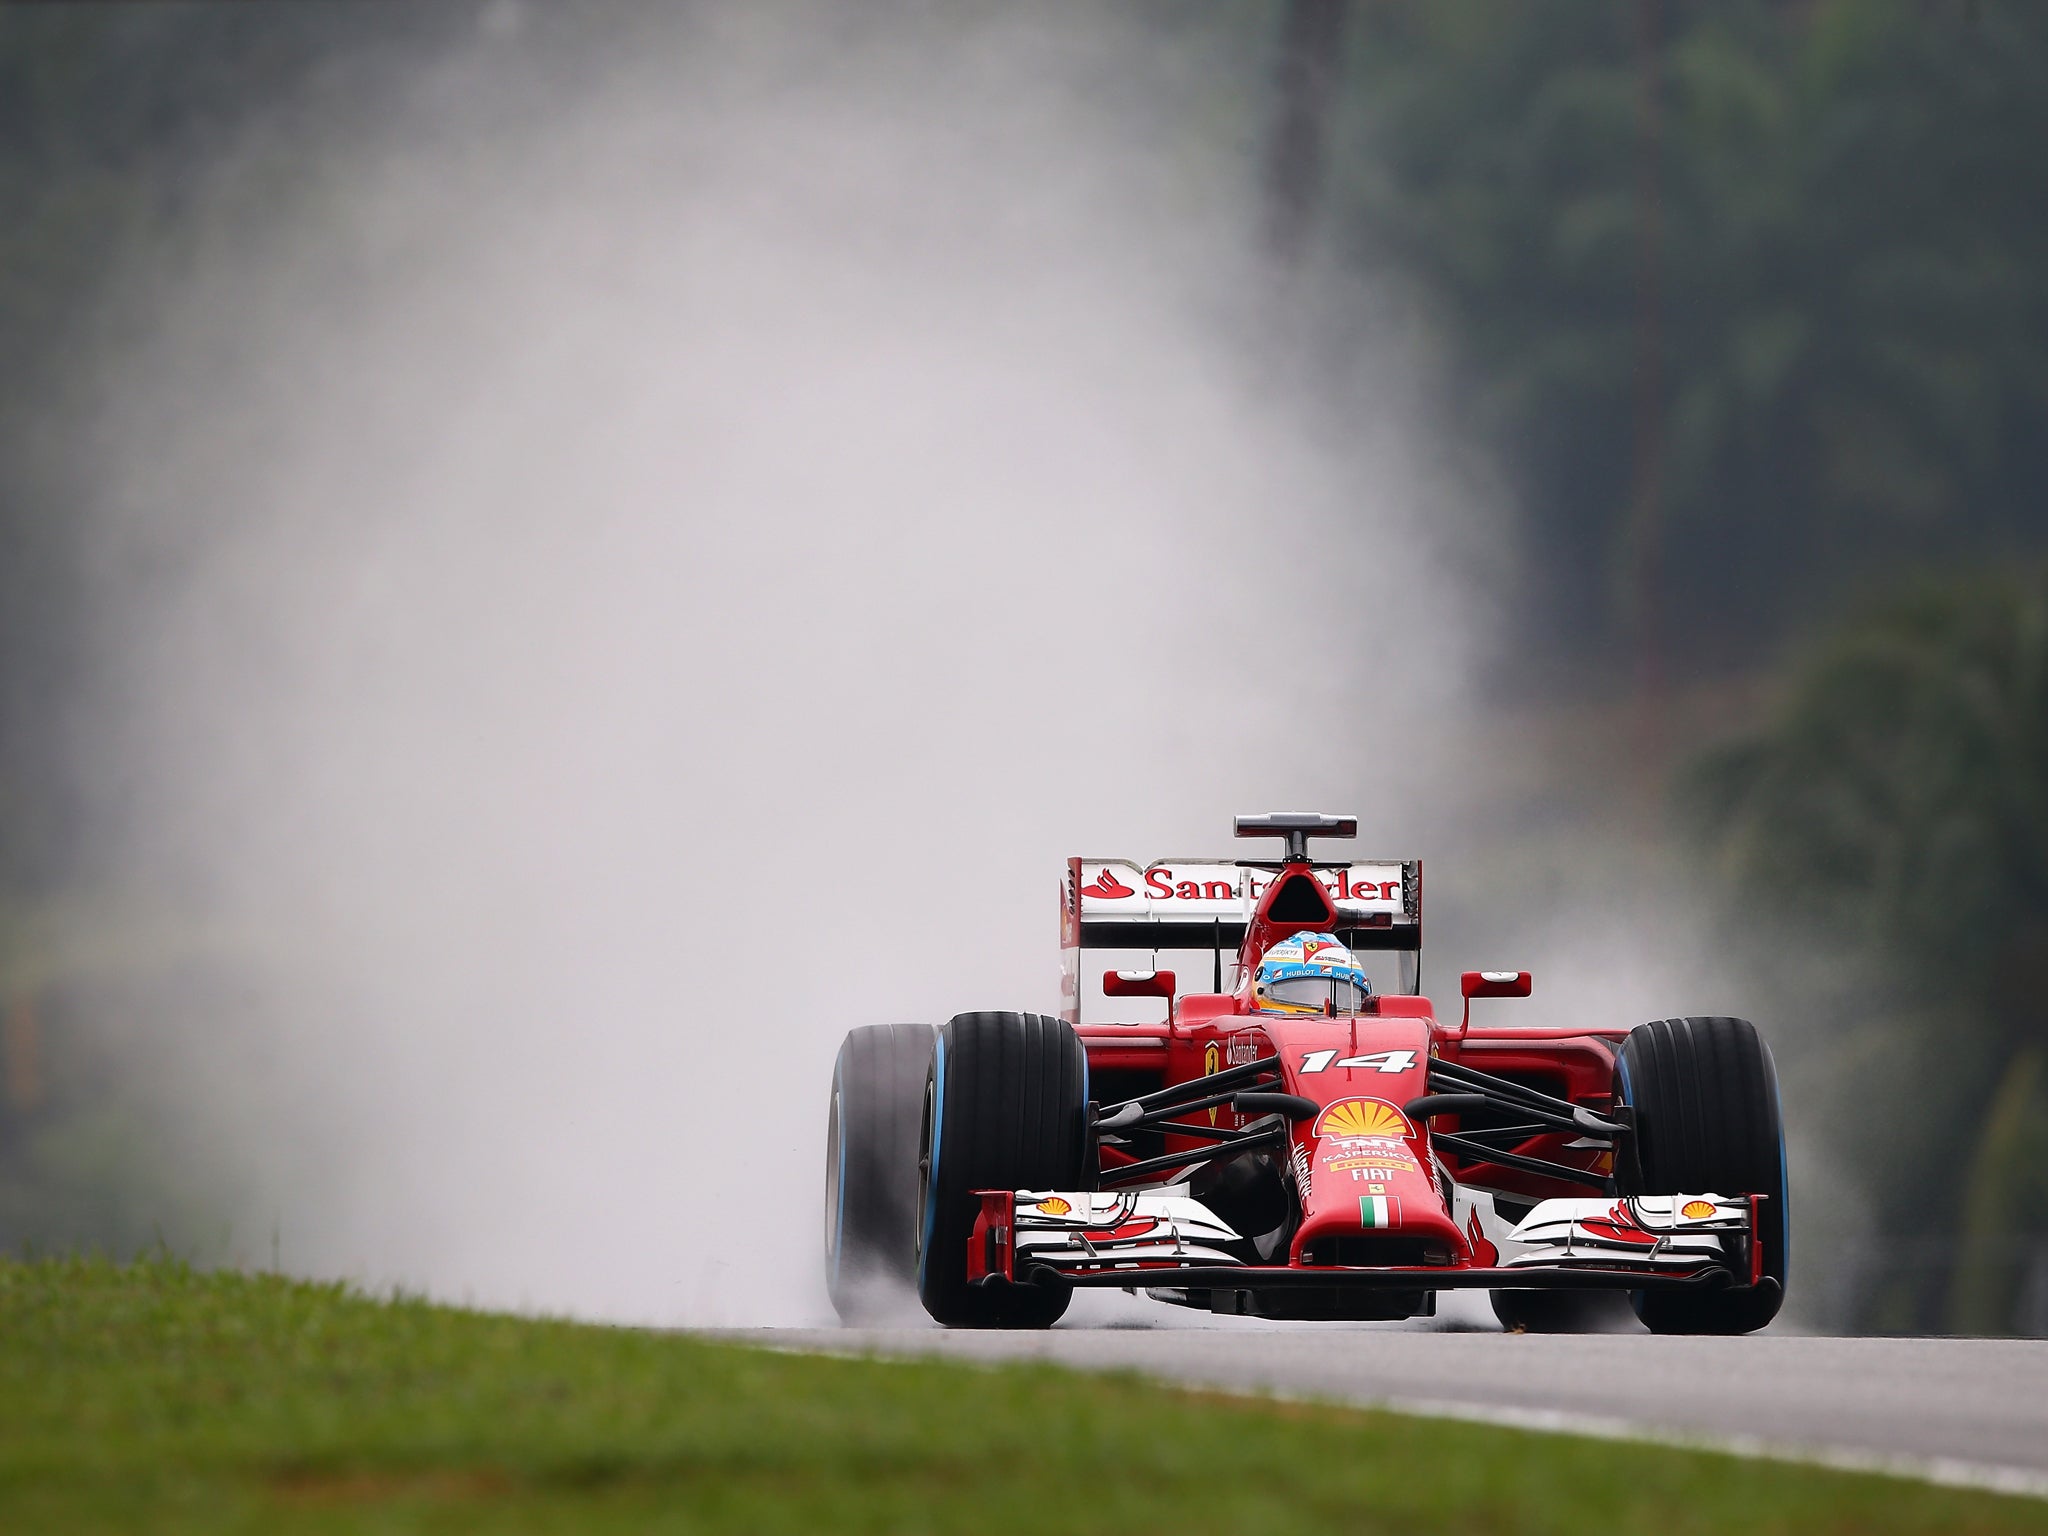 Fernando Alonso thanked his Ferrari mechanics for a rapid repair in the Malaysian Grand Prix qualifying session